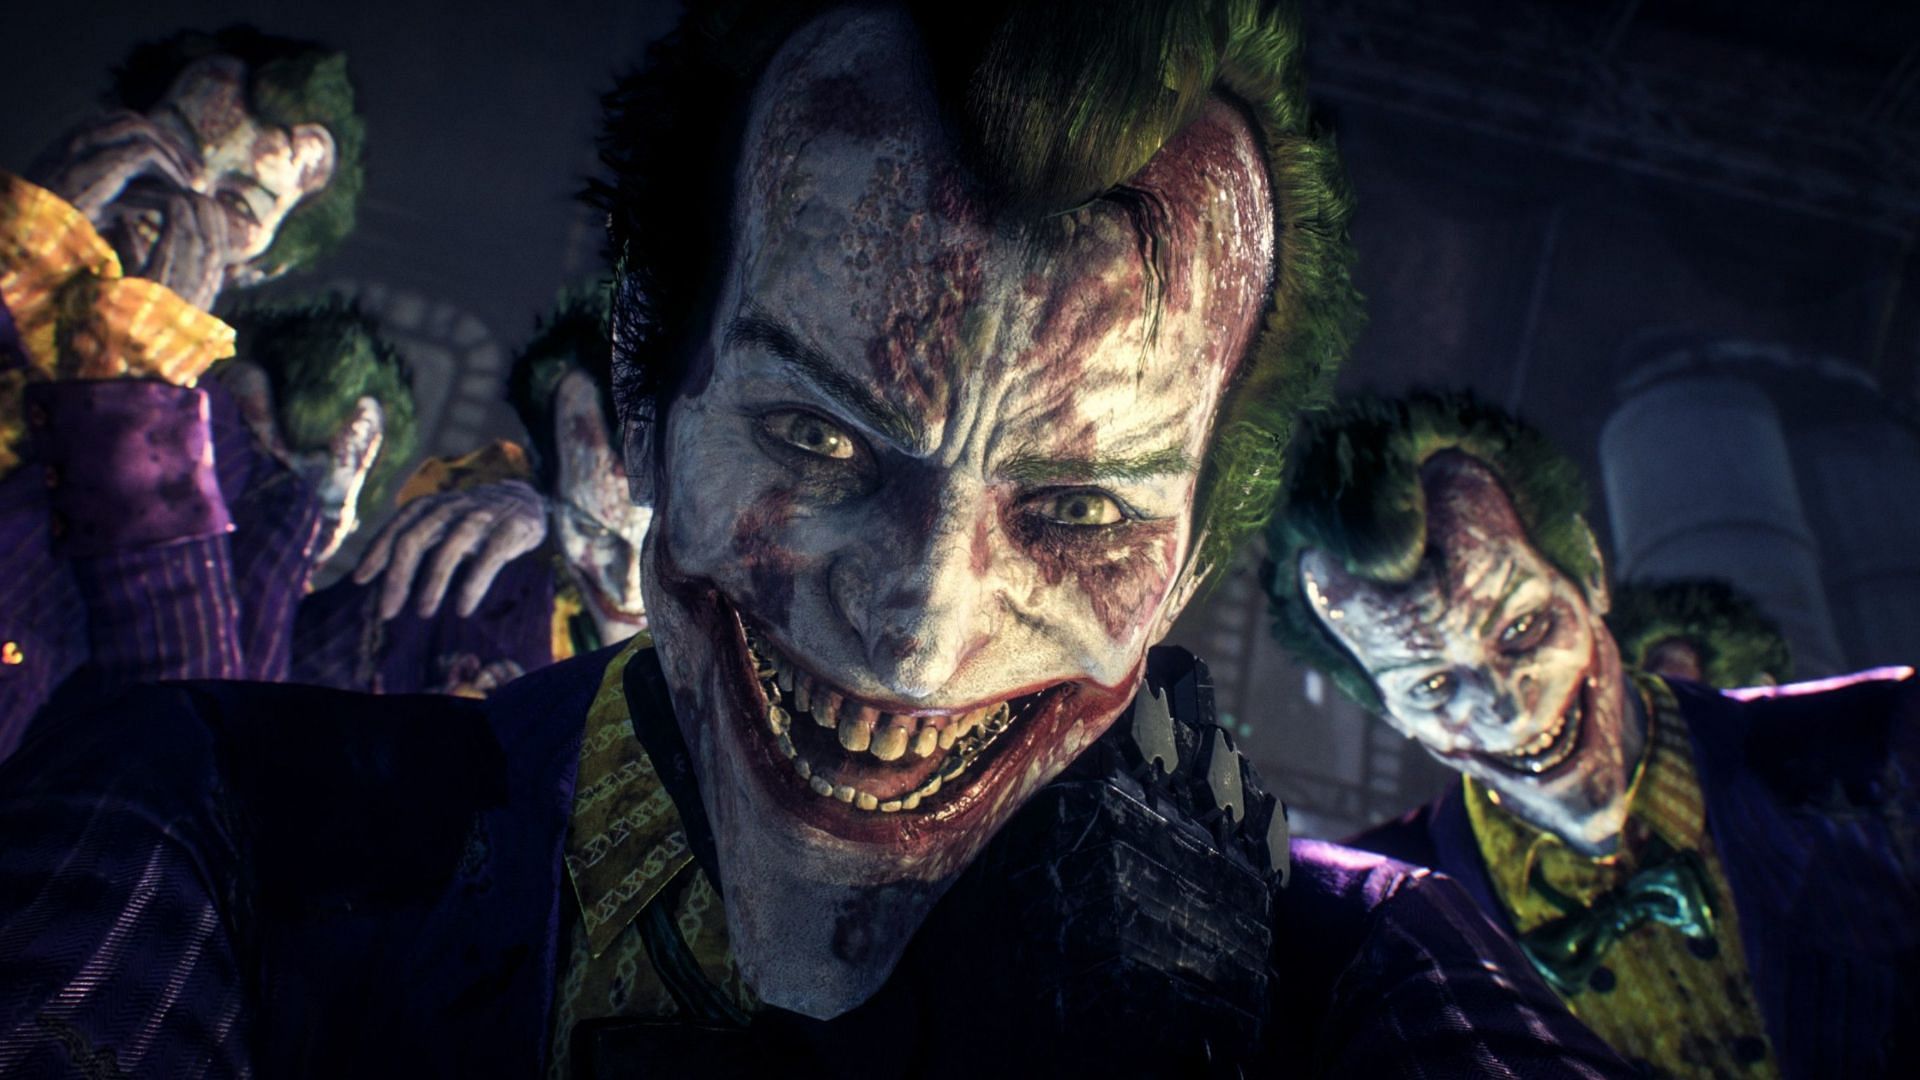 The Joker continues to inspire and terrorize (Image via Rocksteady)